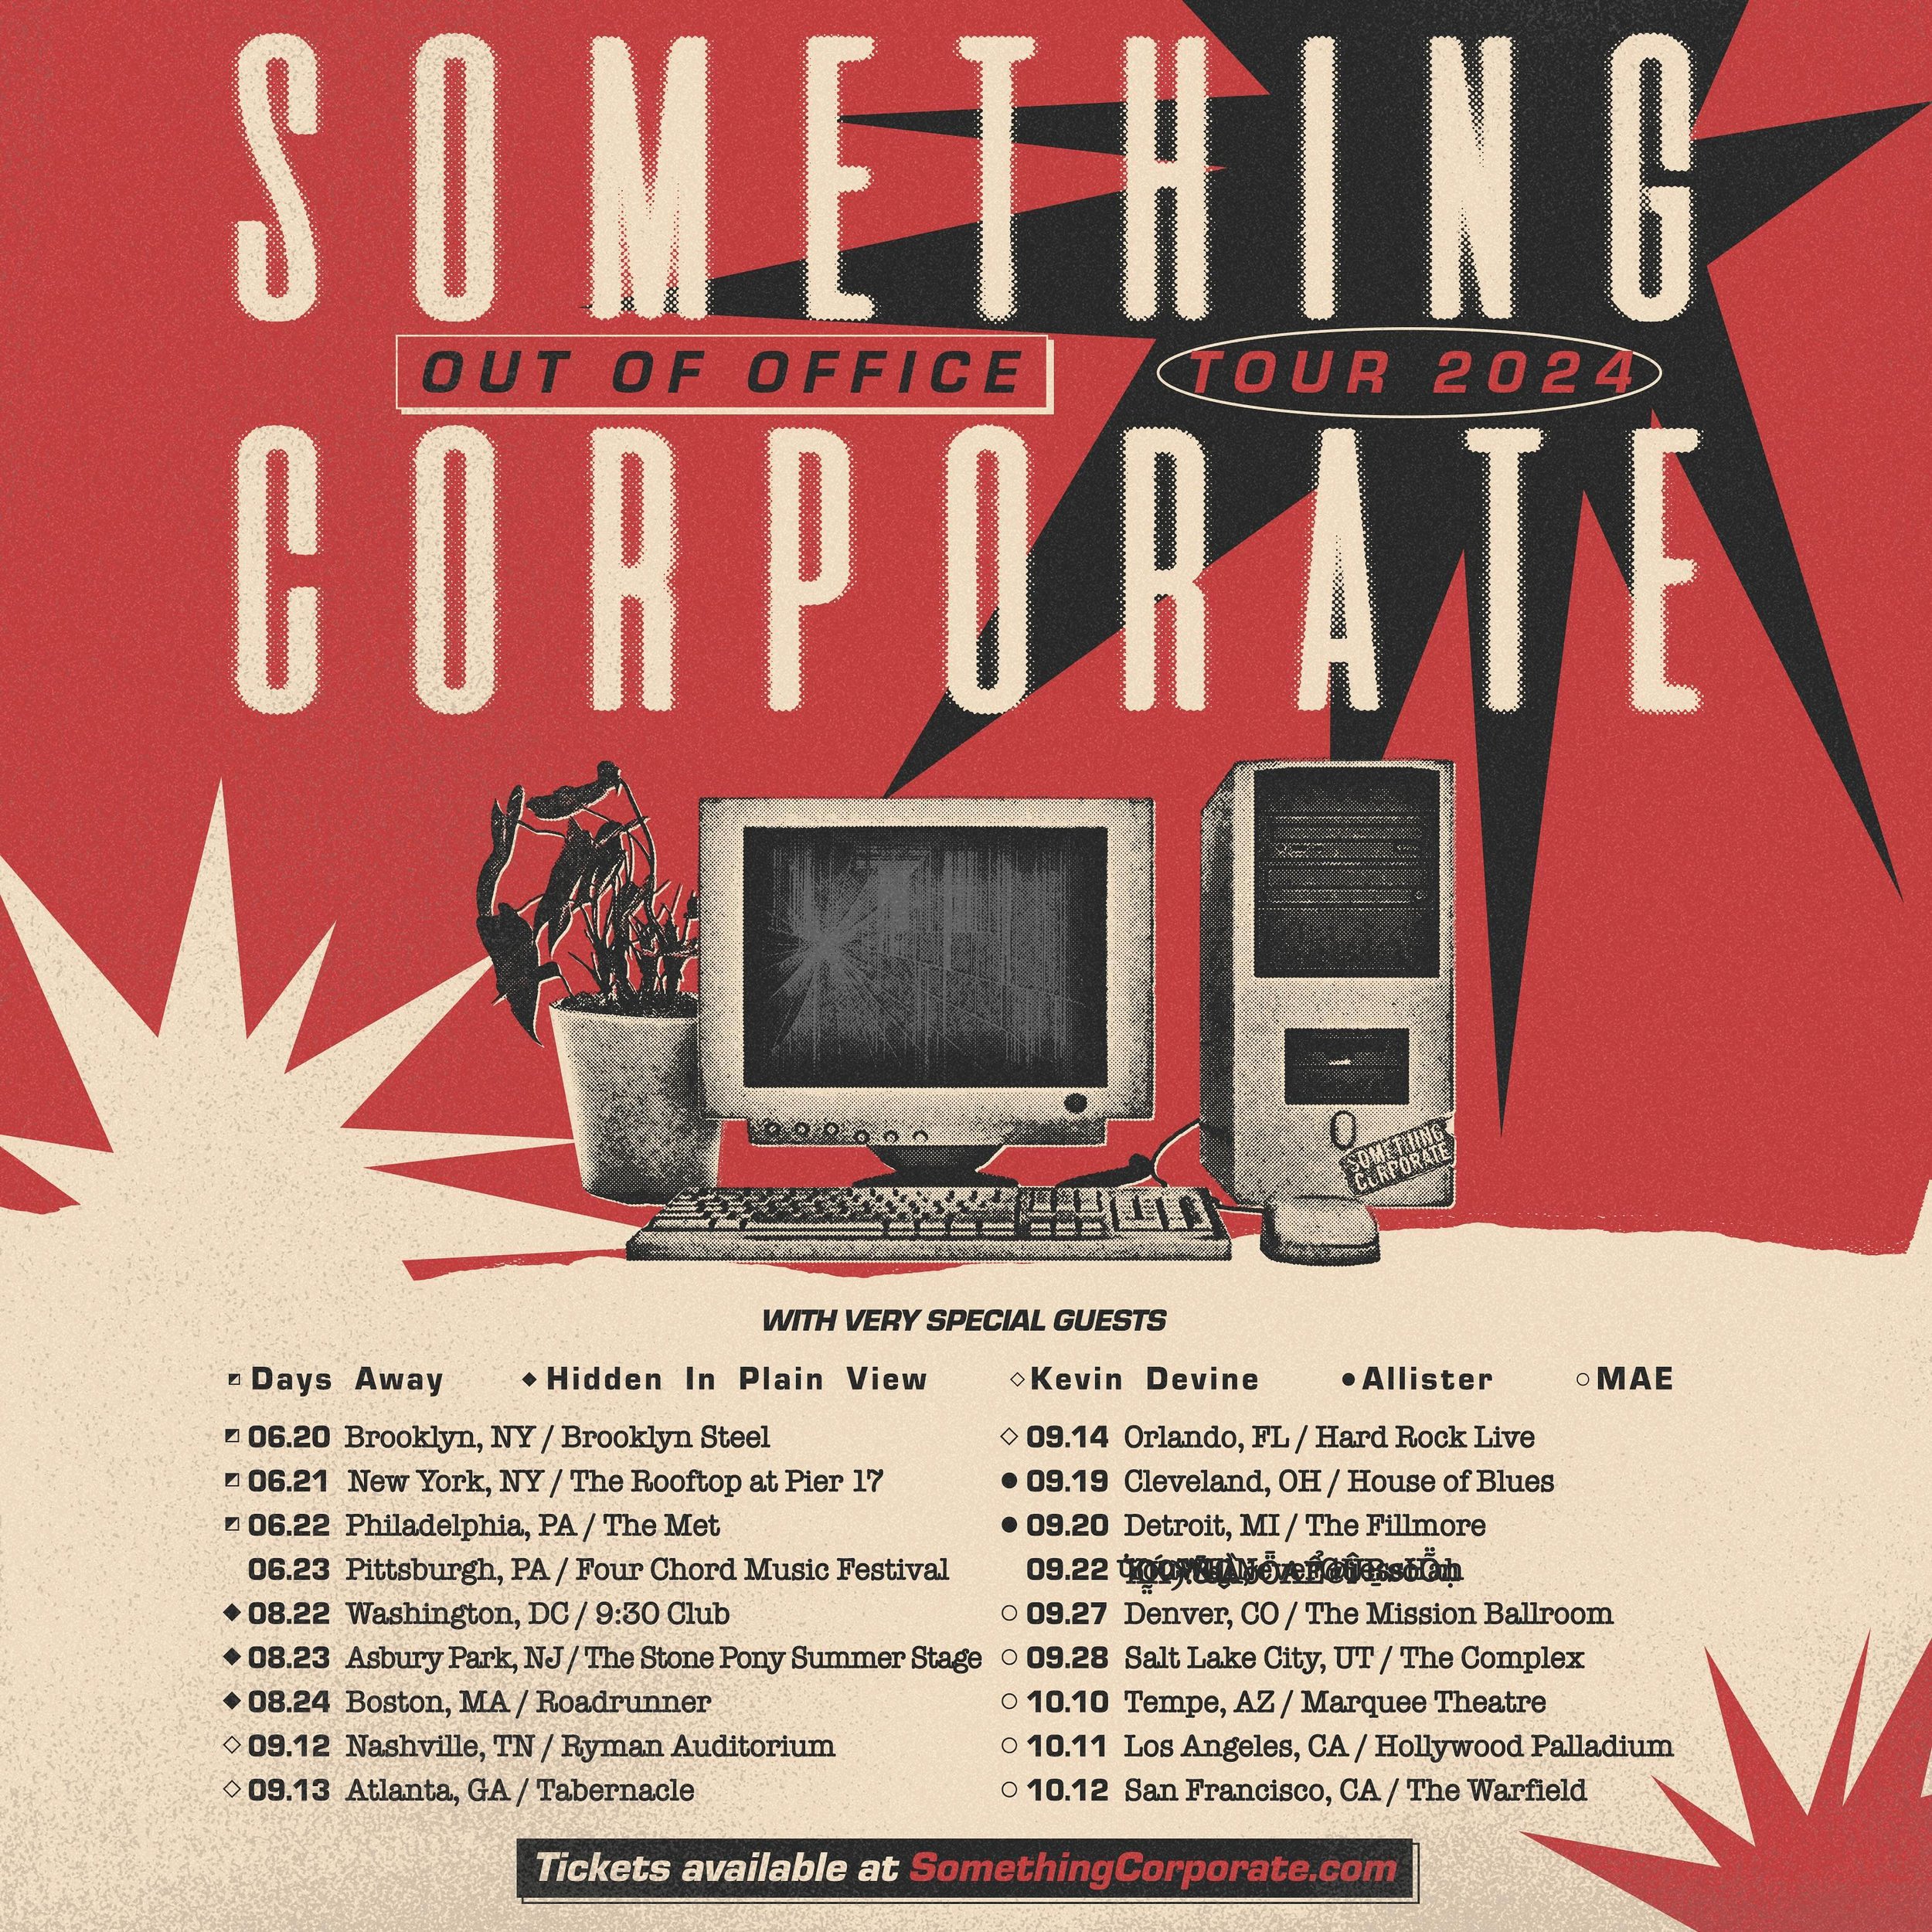 Sometimes I do in fact get out of the studio 😎 Very stoked that my band @hiddeninplainview is playing some shows this summer with @somethingcorporate !!! Who am I gonna see out there??